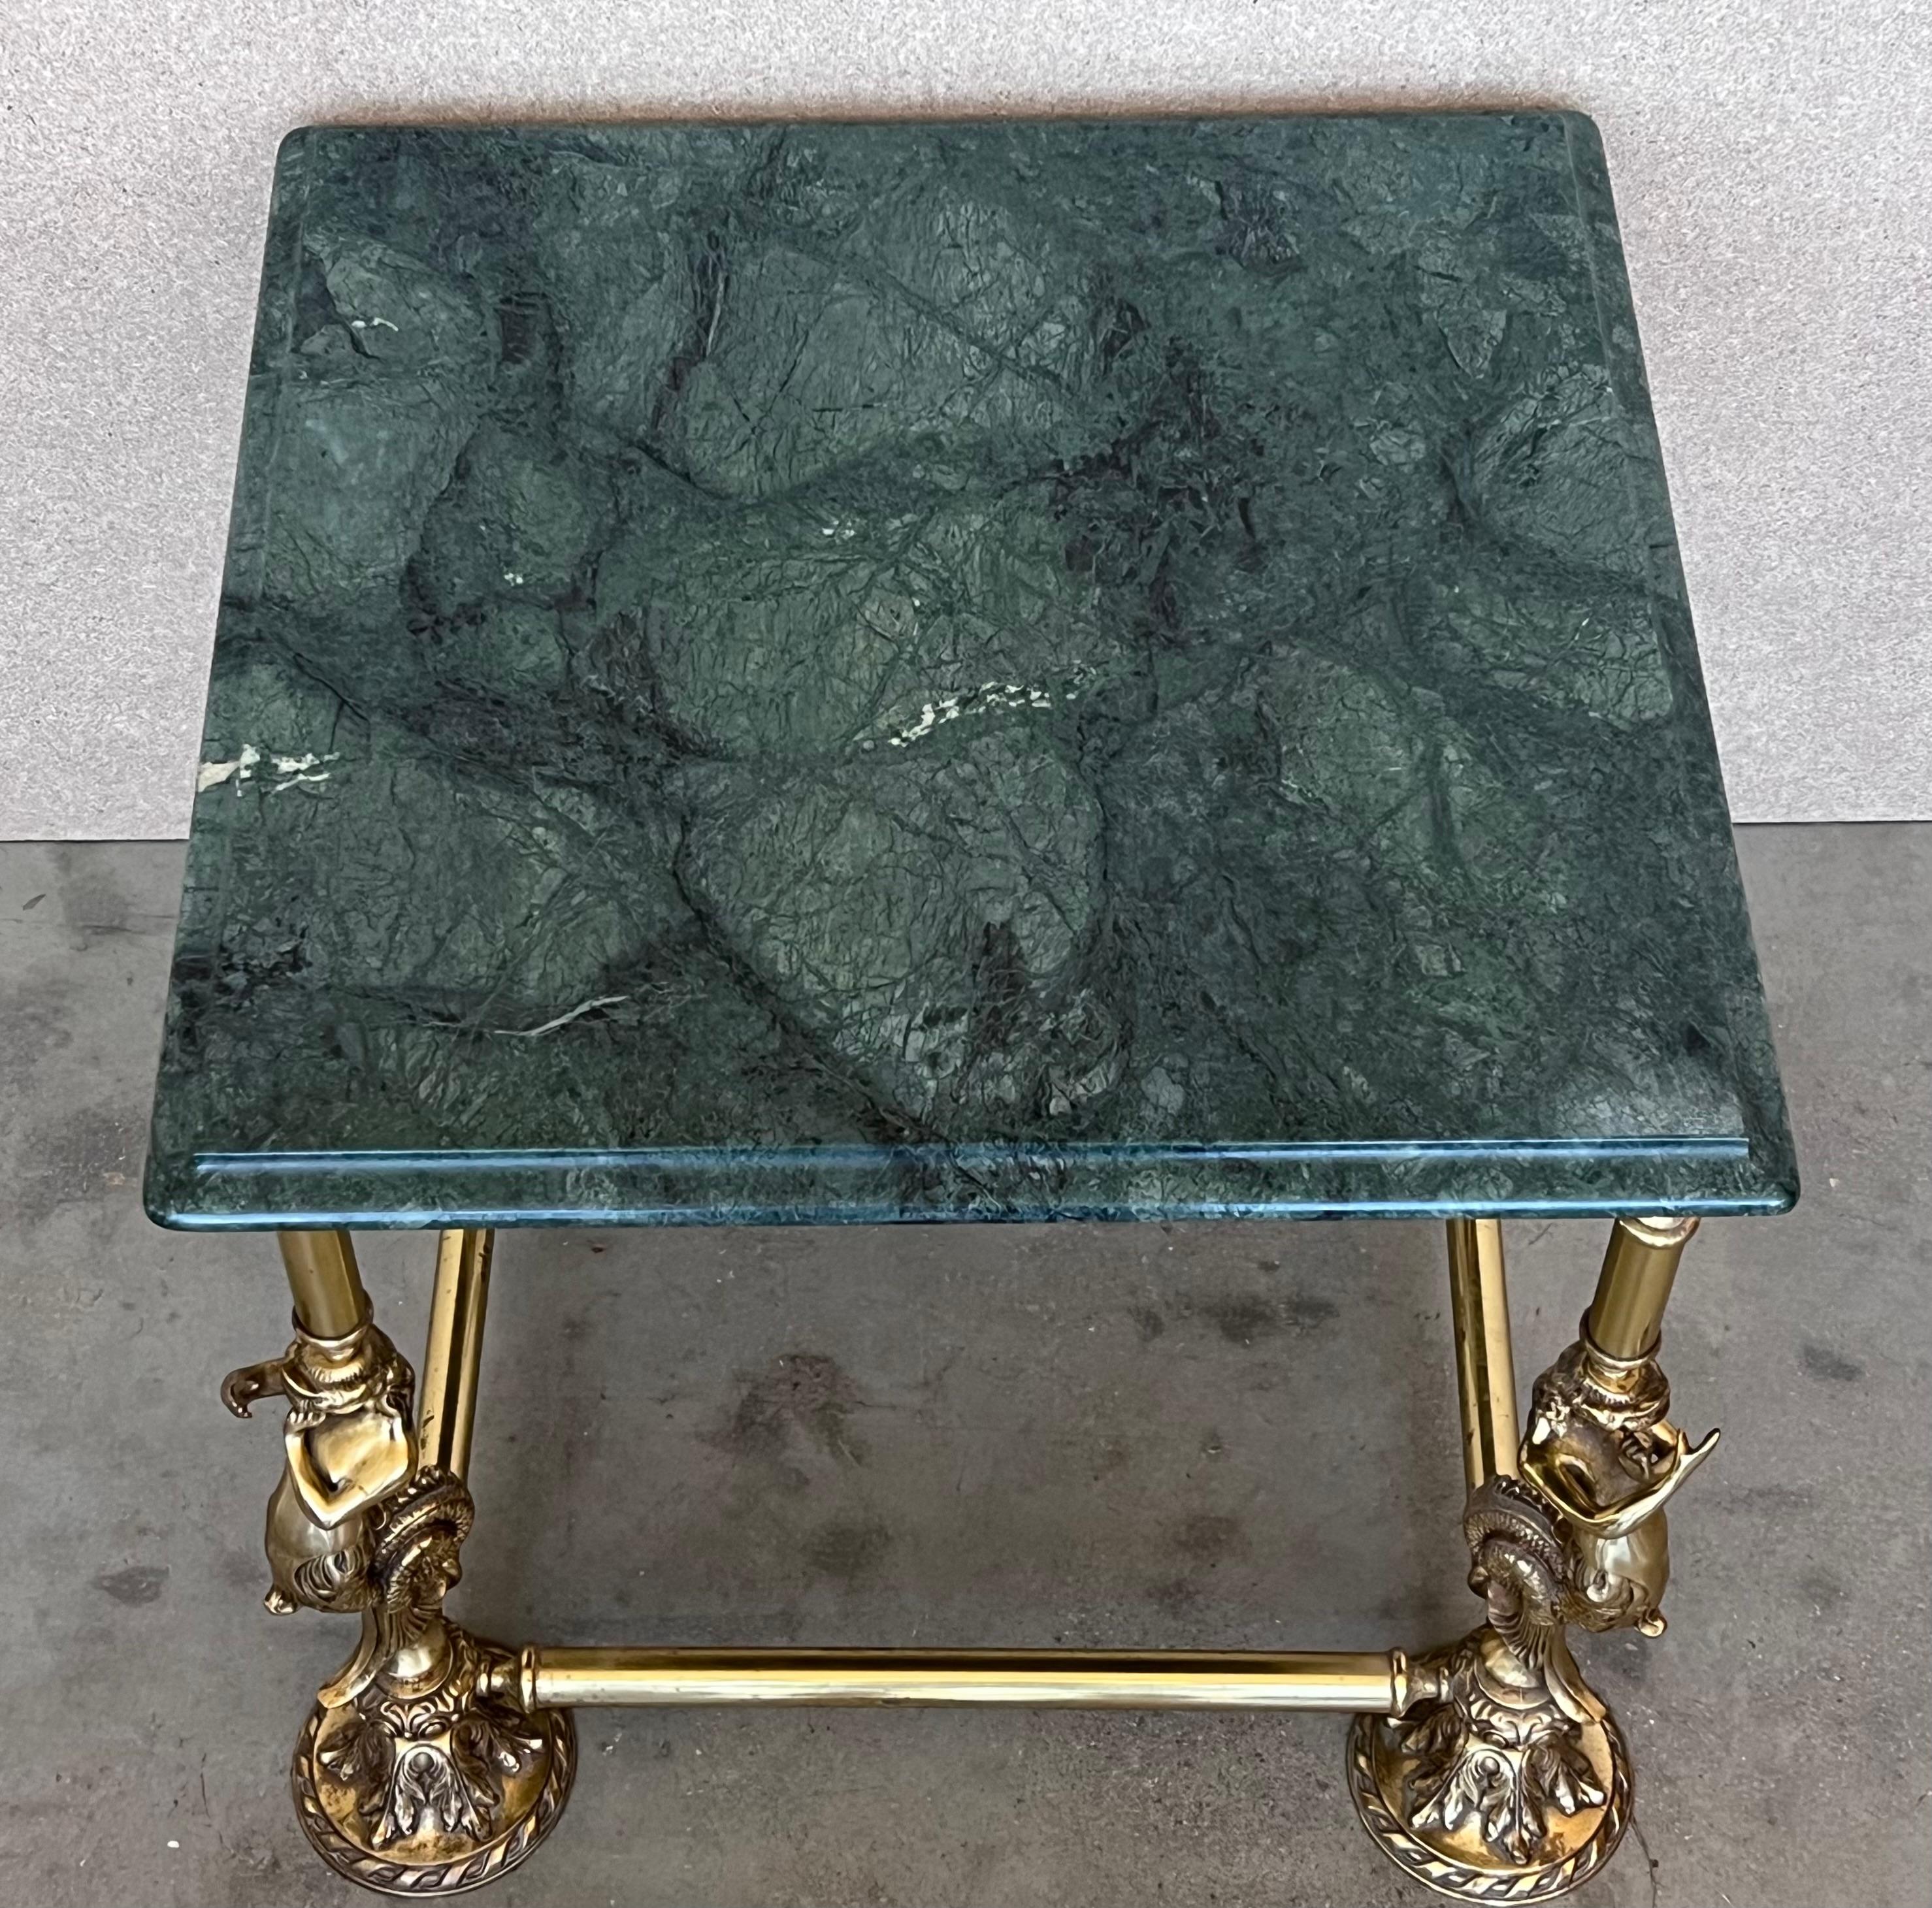 Italian Bronze Square Side Table with Green Marble Top, circa 1845 In Good Condition For Sale In Miami, FL